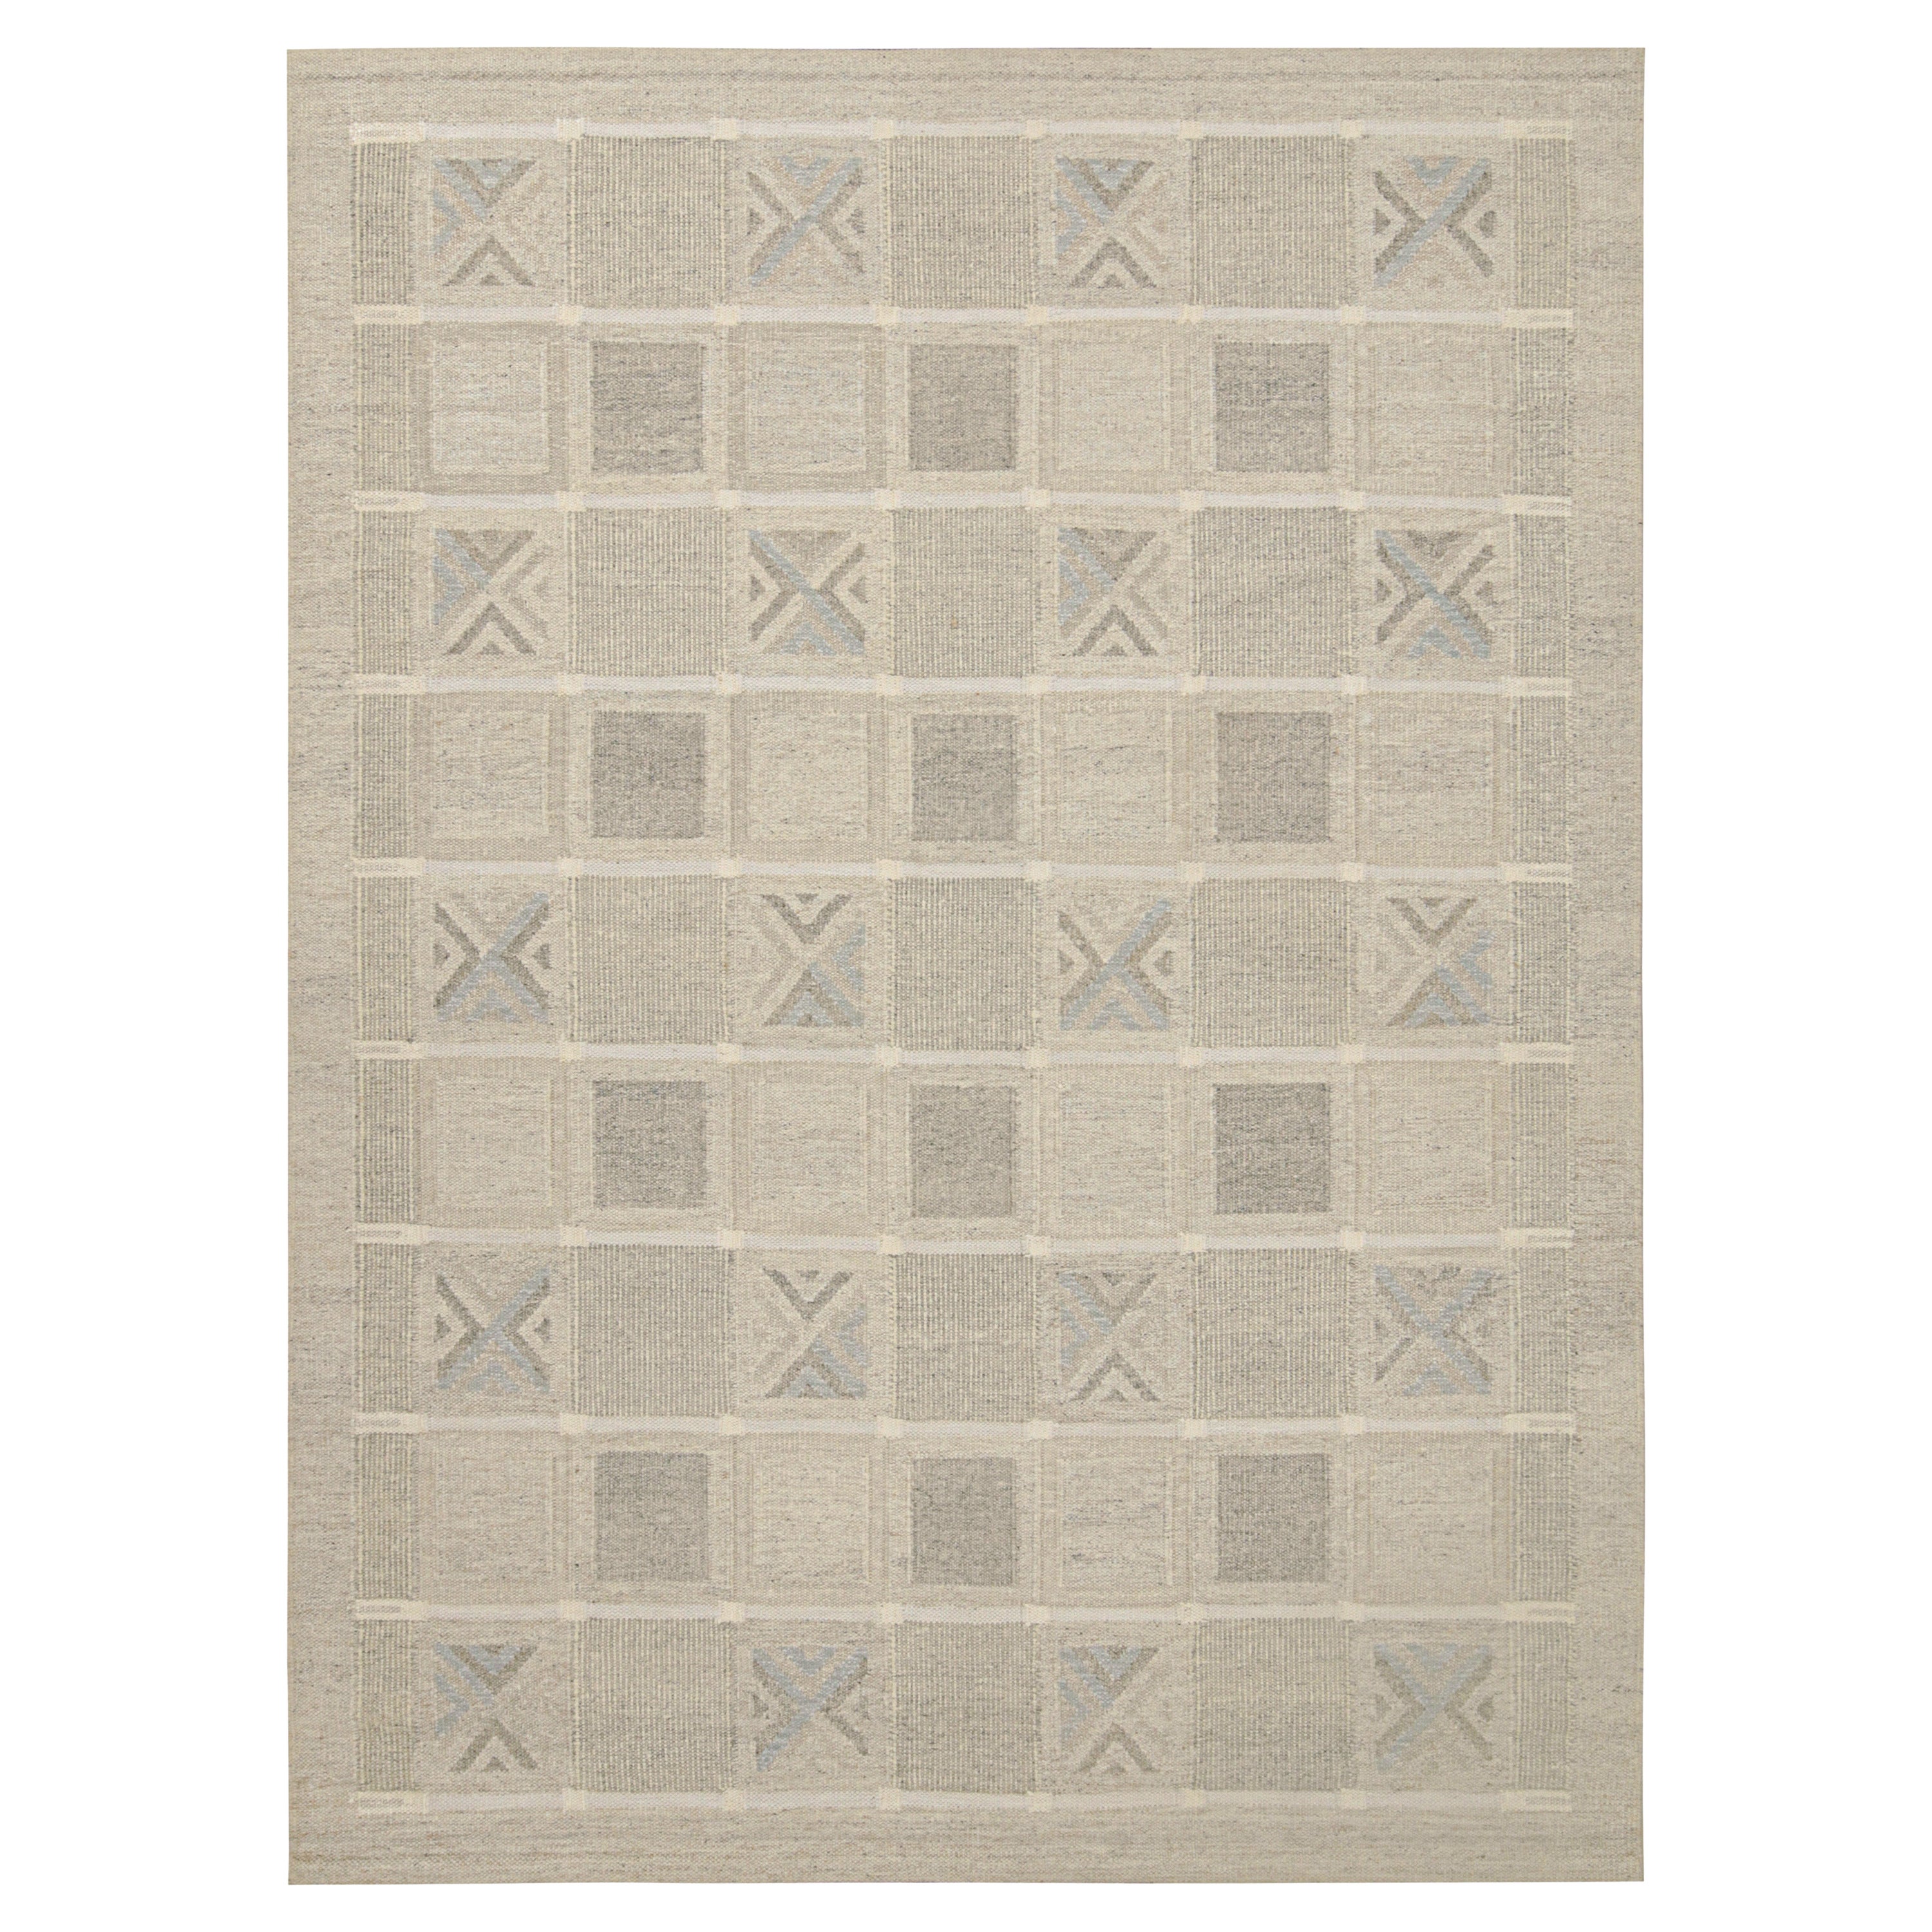 Rug & Kilim’s Scandinavian Style Kilim with Beige and Gray Geometric Patterns For Sale